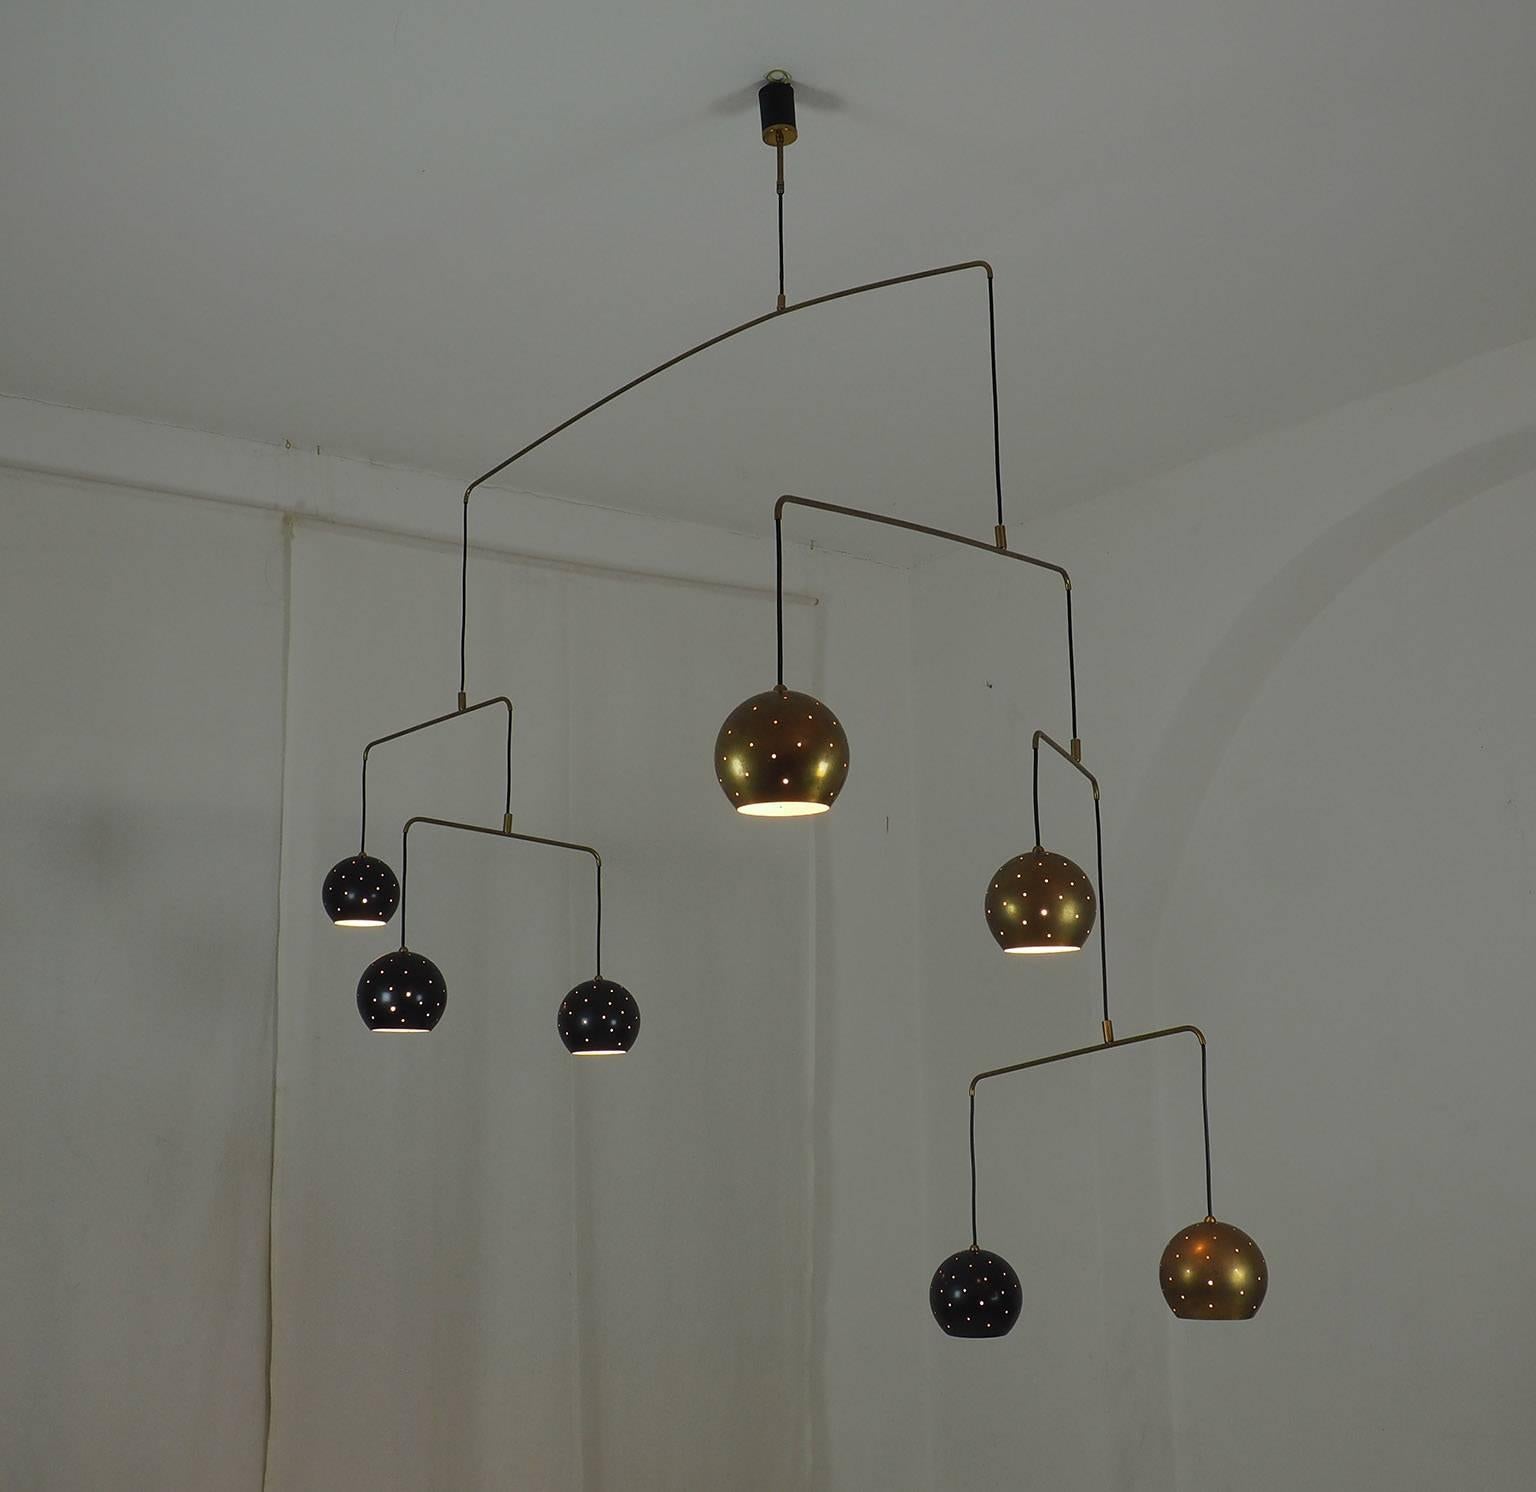 Original Italian brass mobile chandelier designed in 1980s and manufacturing in a very small handcraft production in Milano.
Large, magic and poetical mobile chandelier with brass and black suspending spheres; it can moves with the flow of